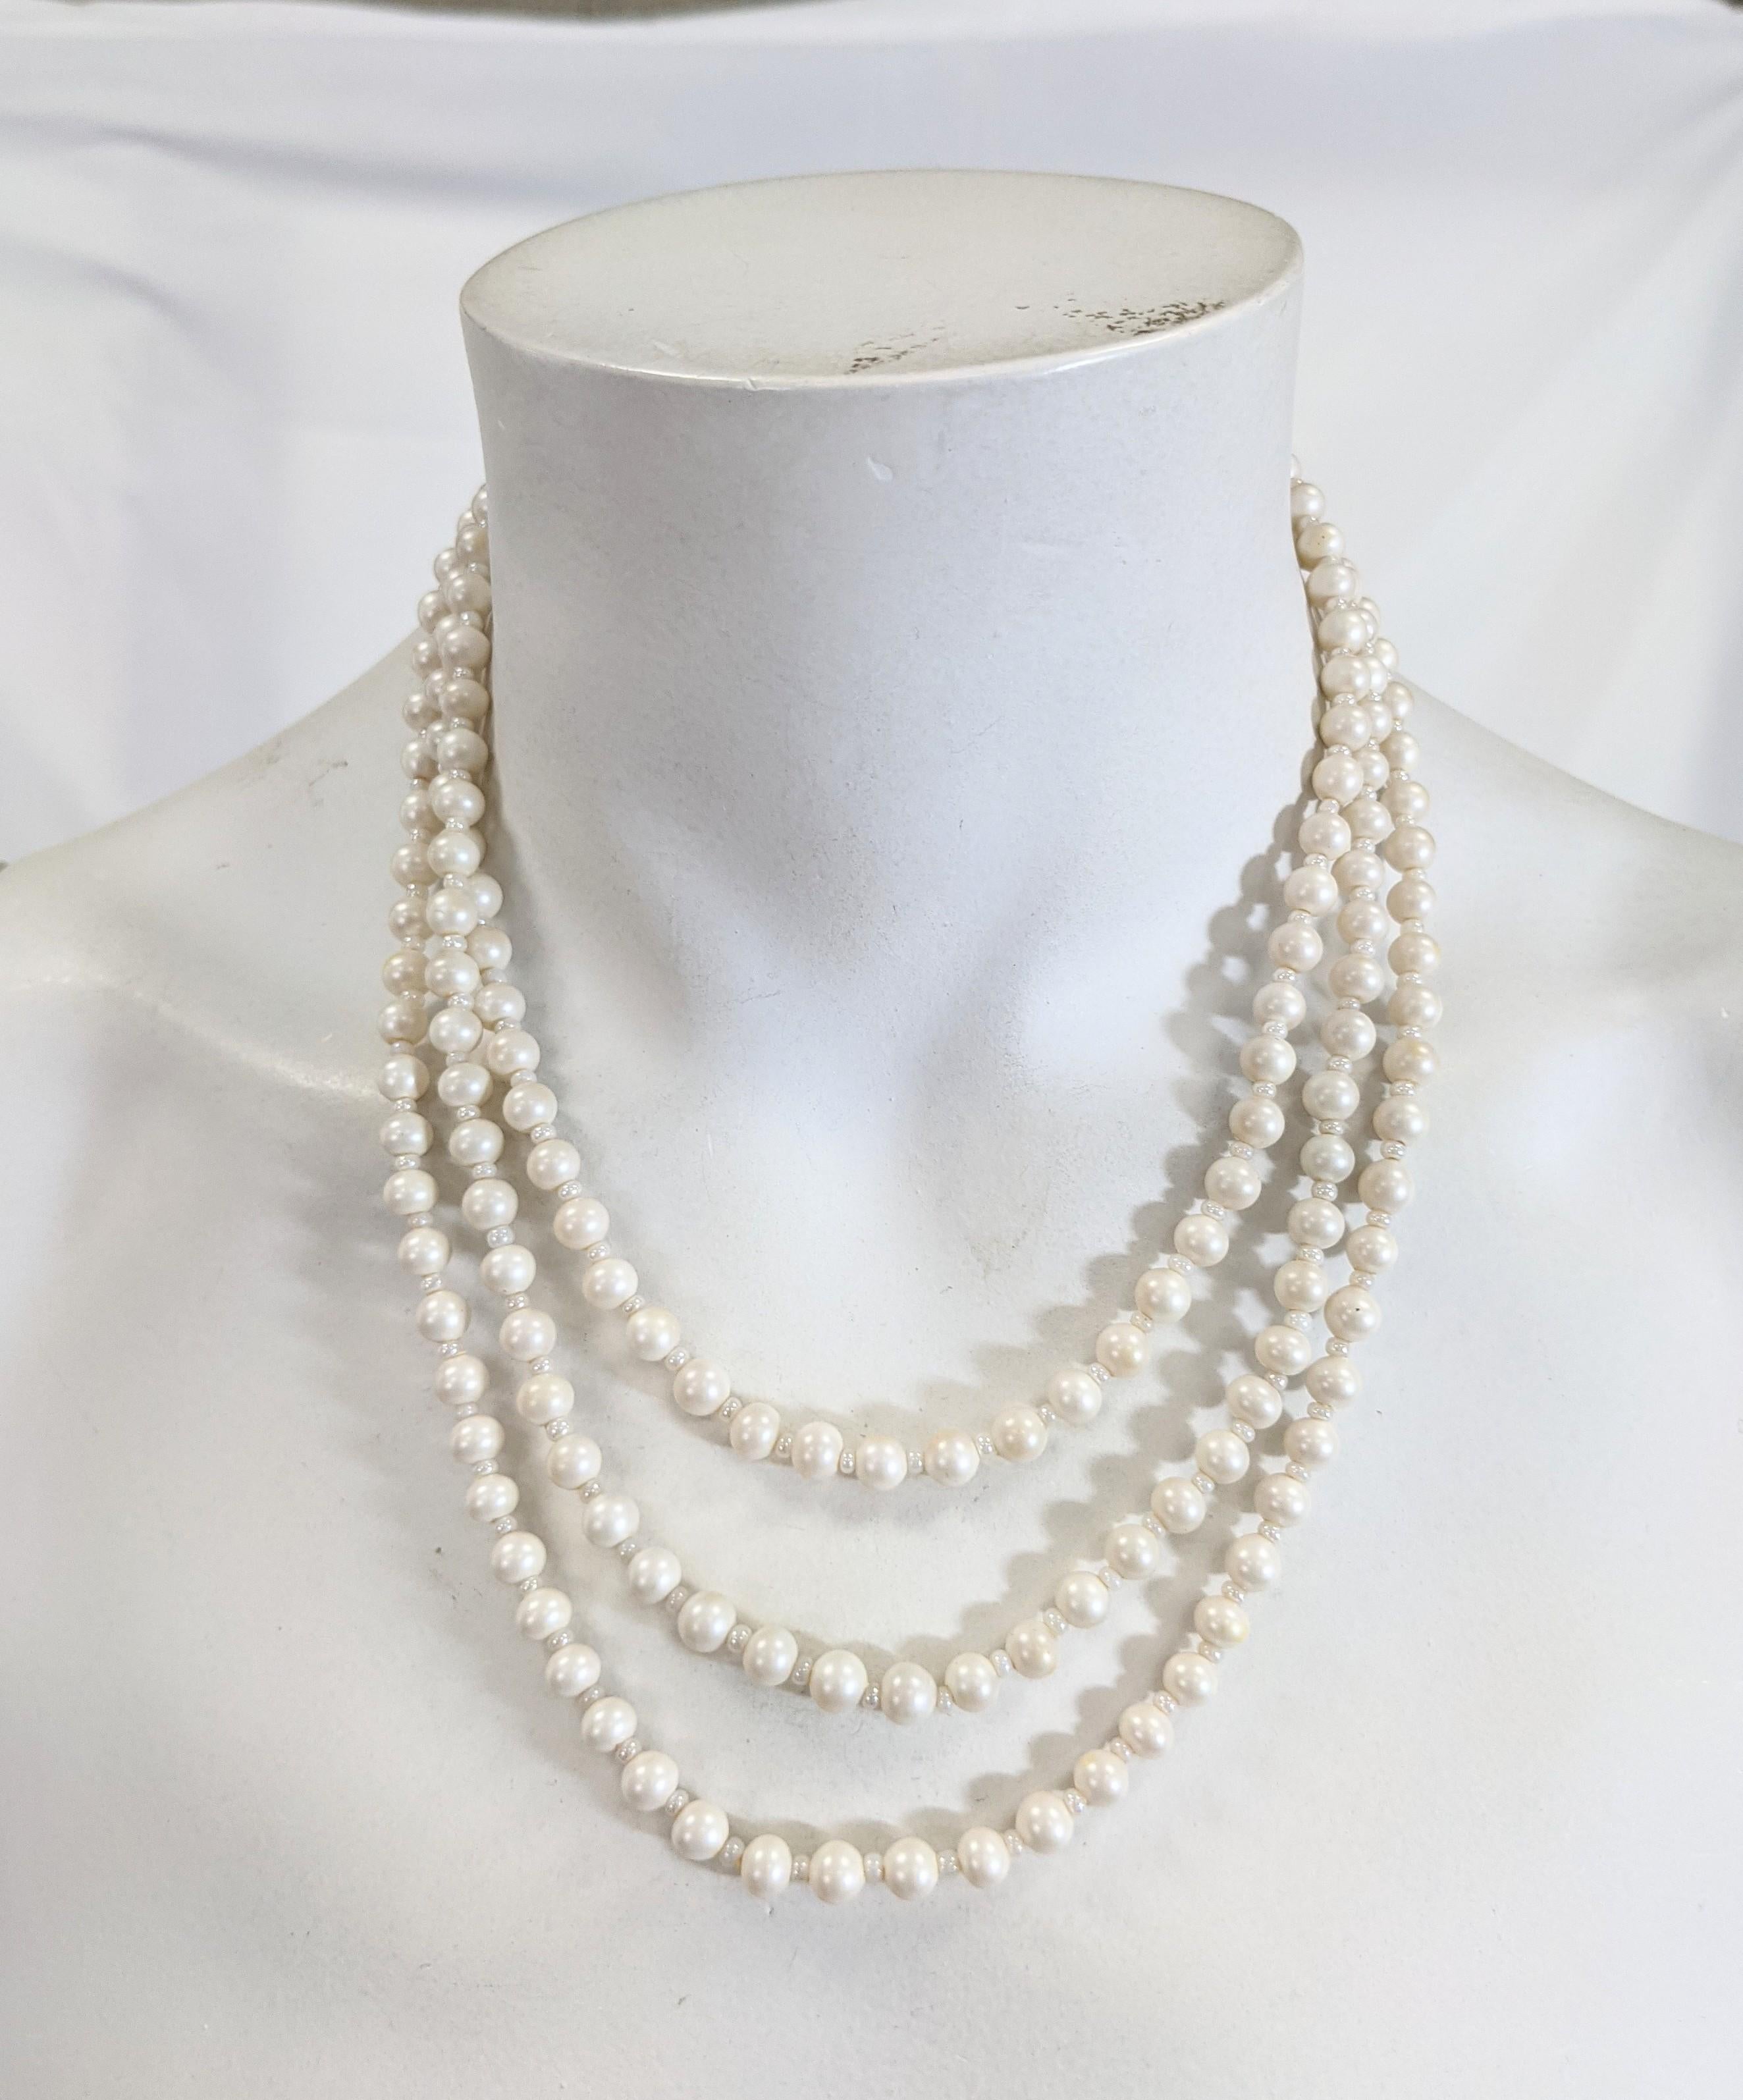 Women's Miriam Haskell Long Faux Pearl Necklace For Sale